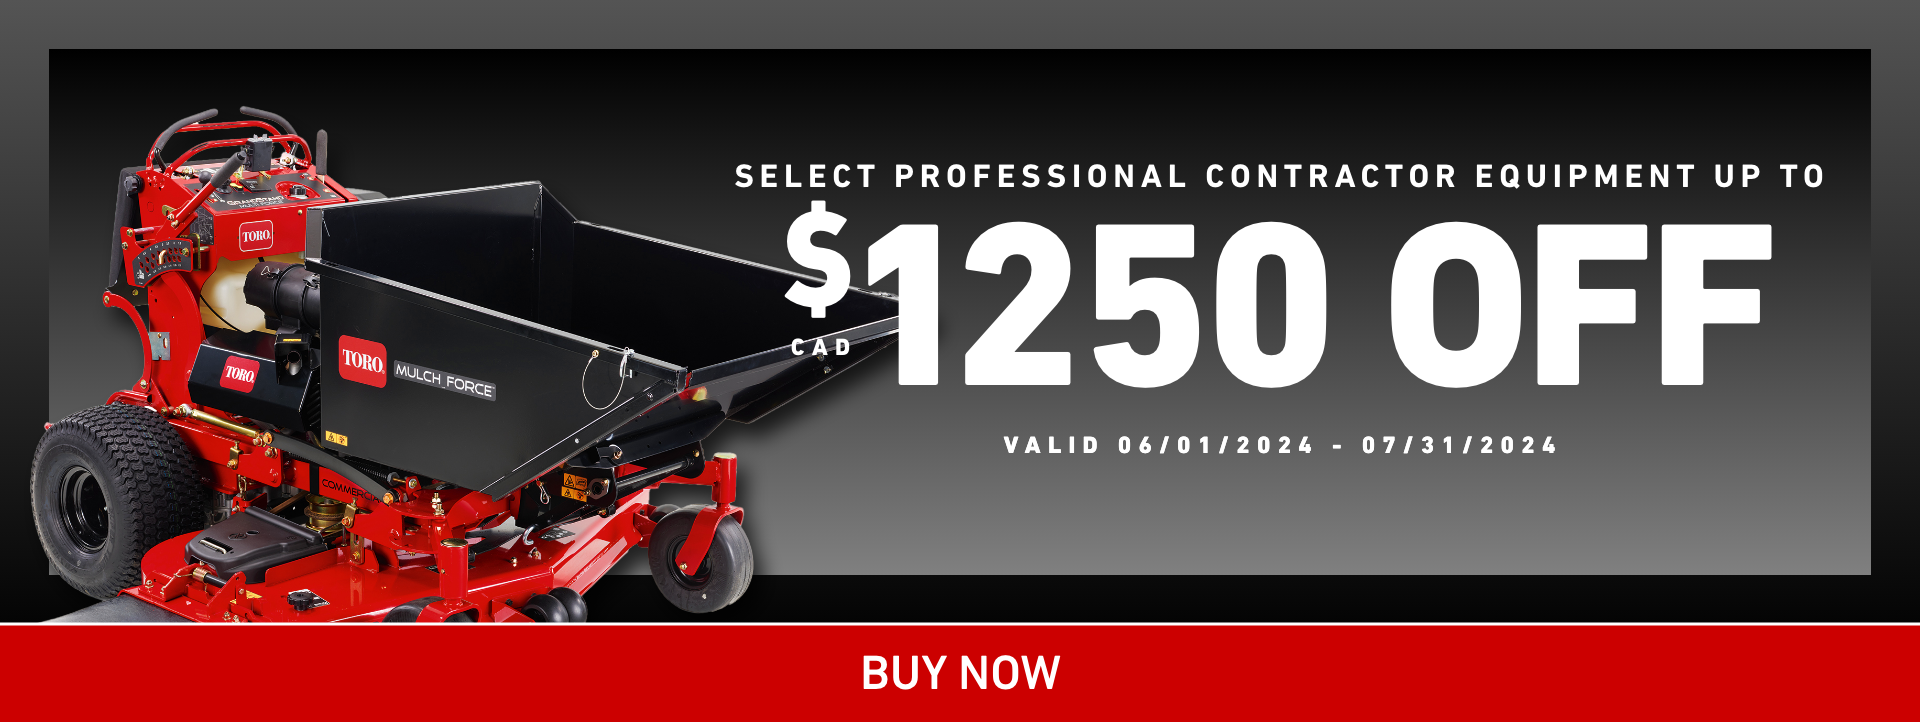 Select Professional Contractor Equipment Up To $1250 off - Valid June 1, 2024 to July 31, 2024